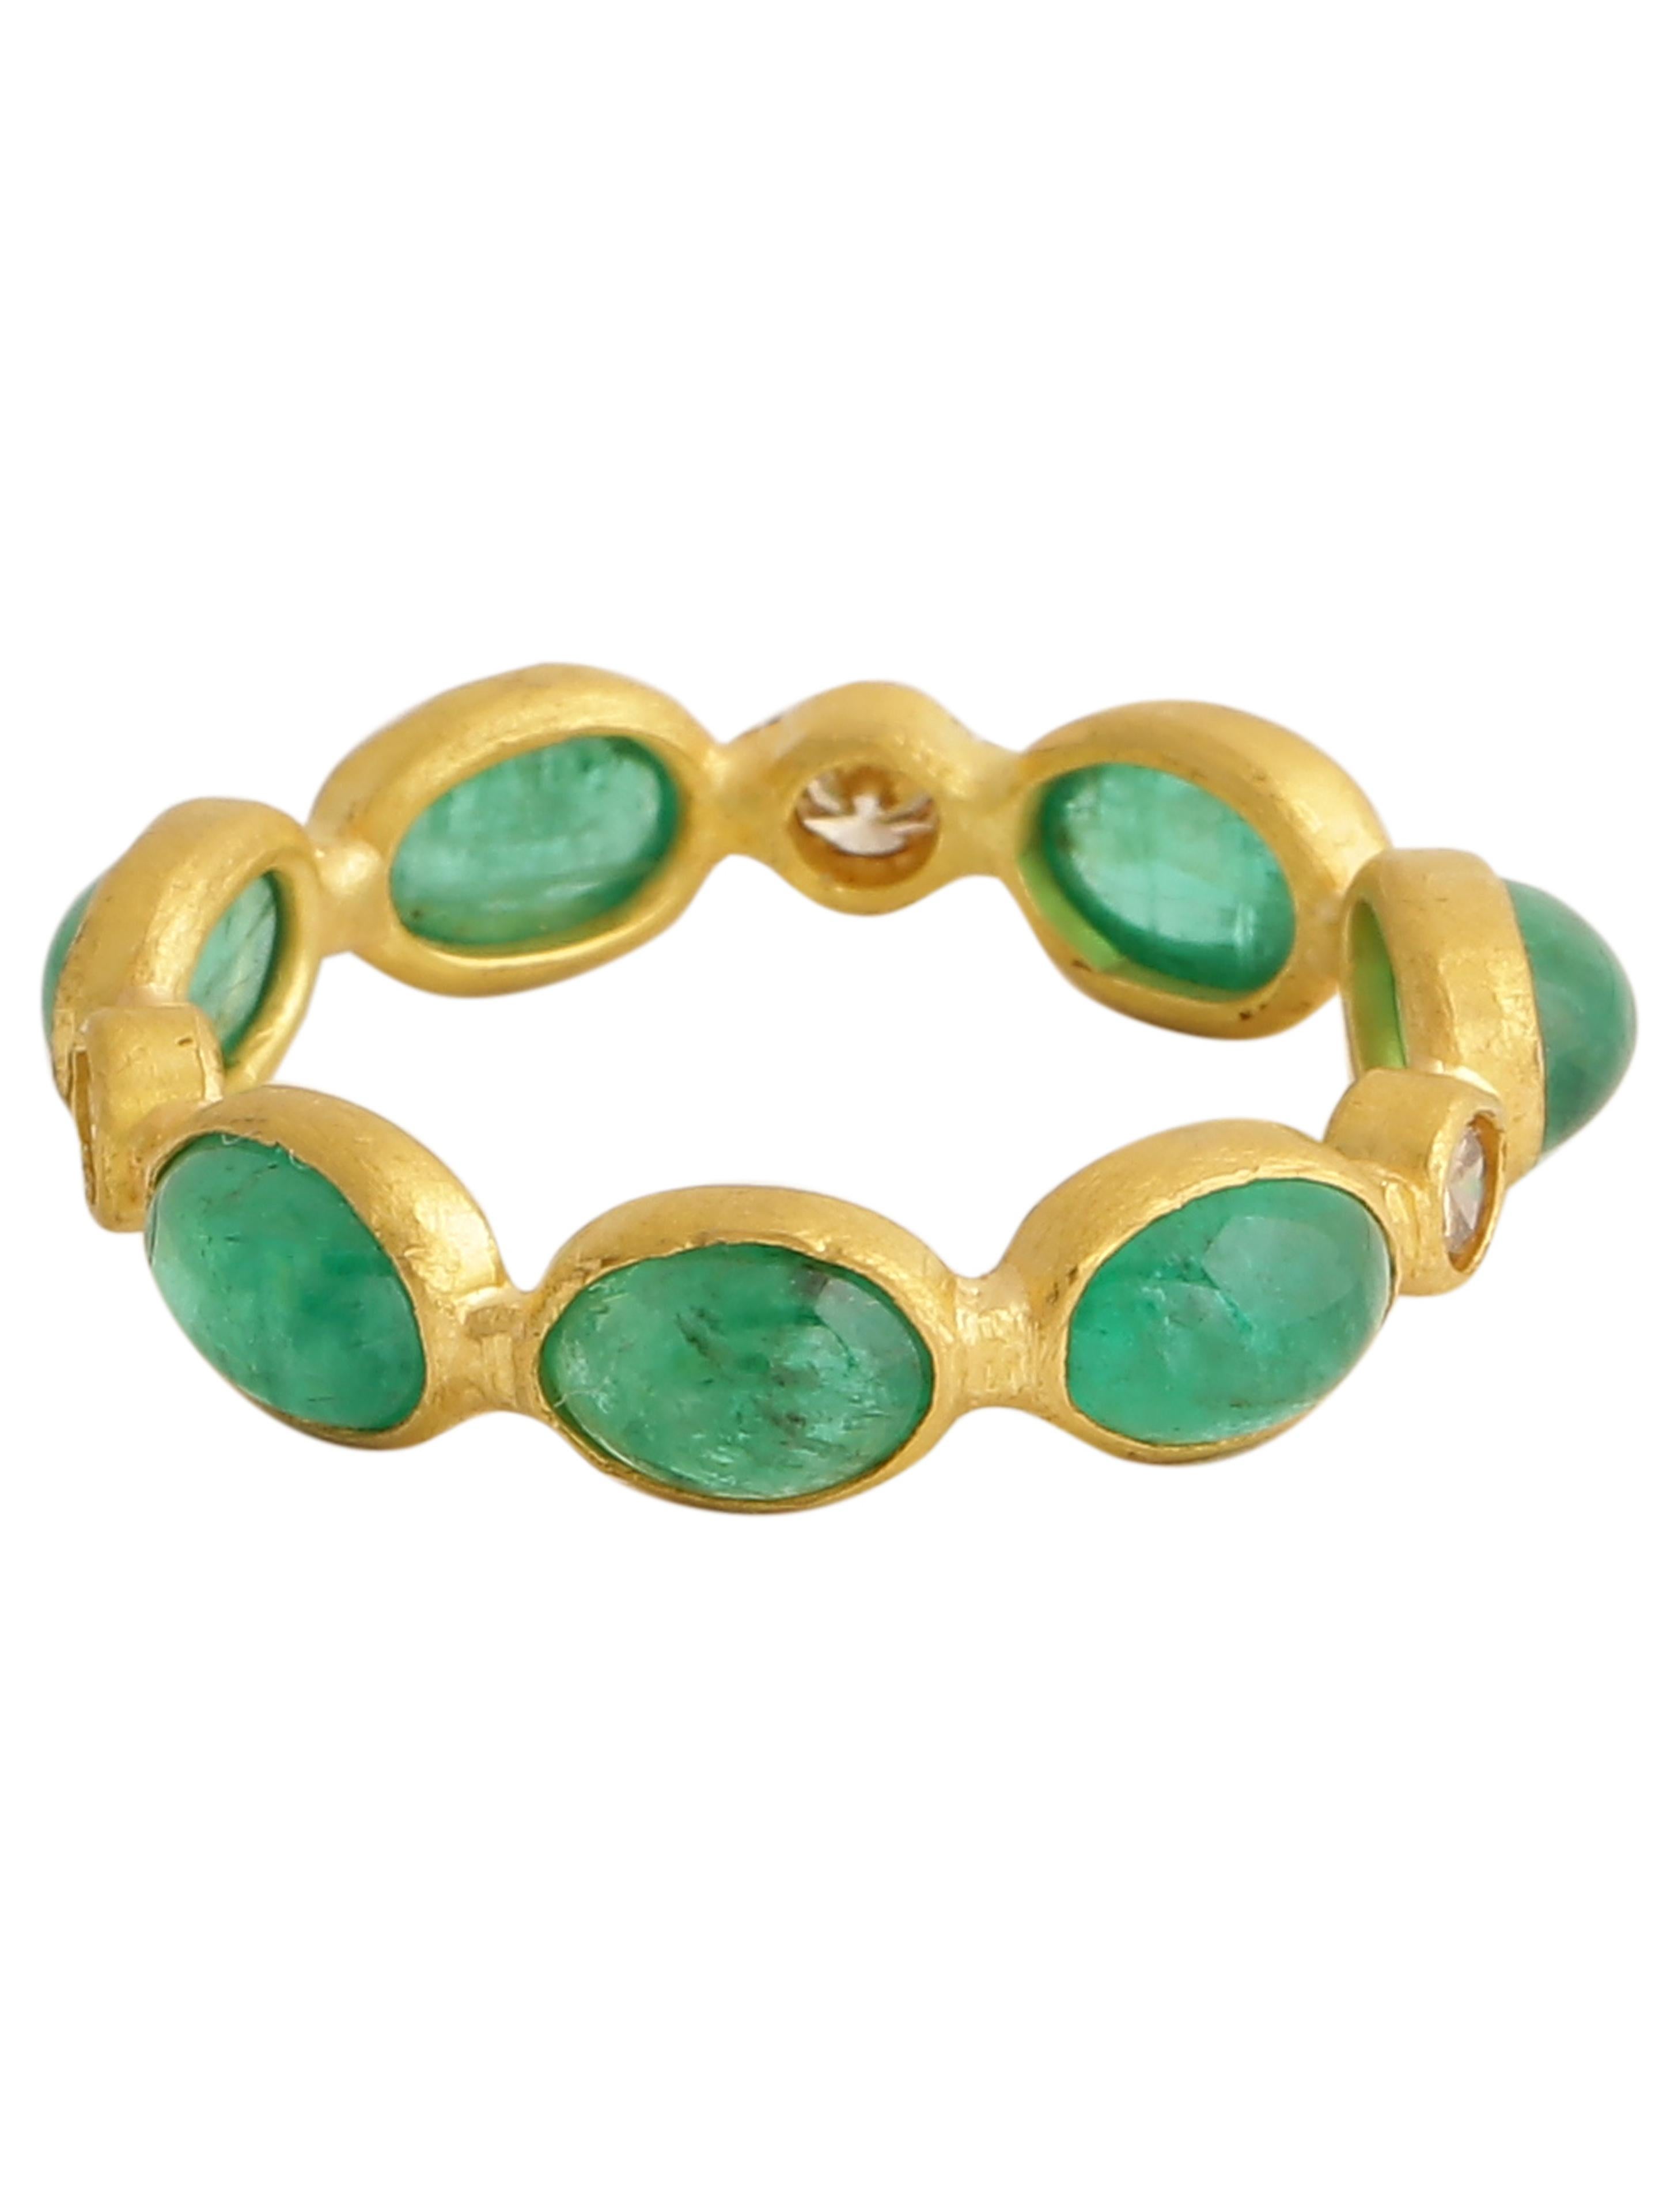 This beautifully handcrafted eternity band  in 22kt matte finish gold is adorned with natural emerald cabochons and diamonds. The ring has been made by hand by extremely talented local artisans from Jaipur- a city known world over for its fine